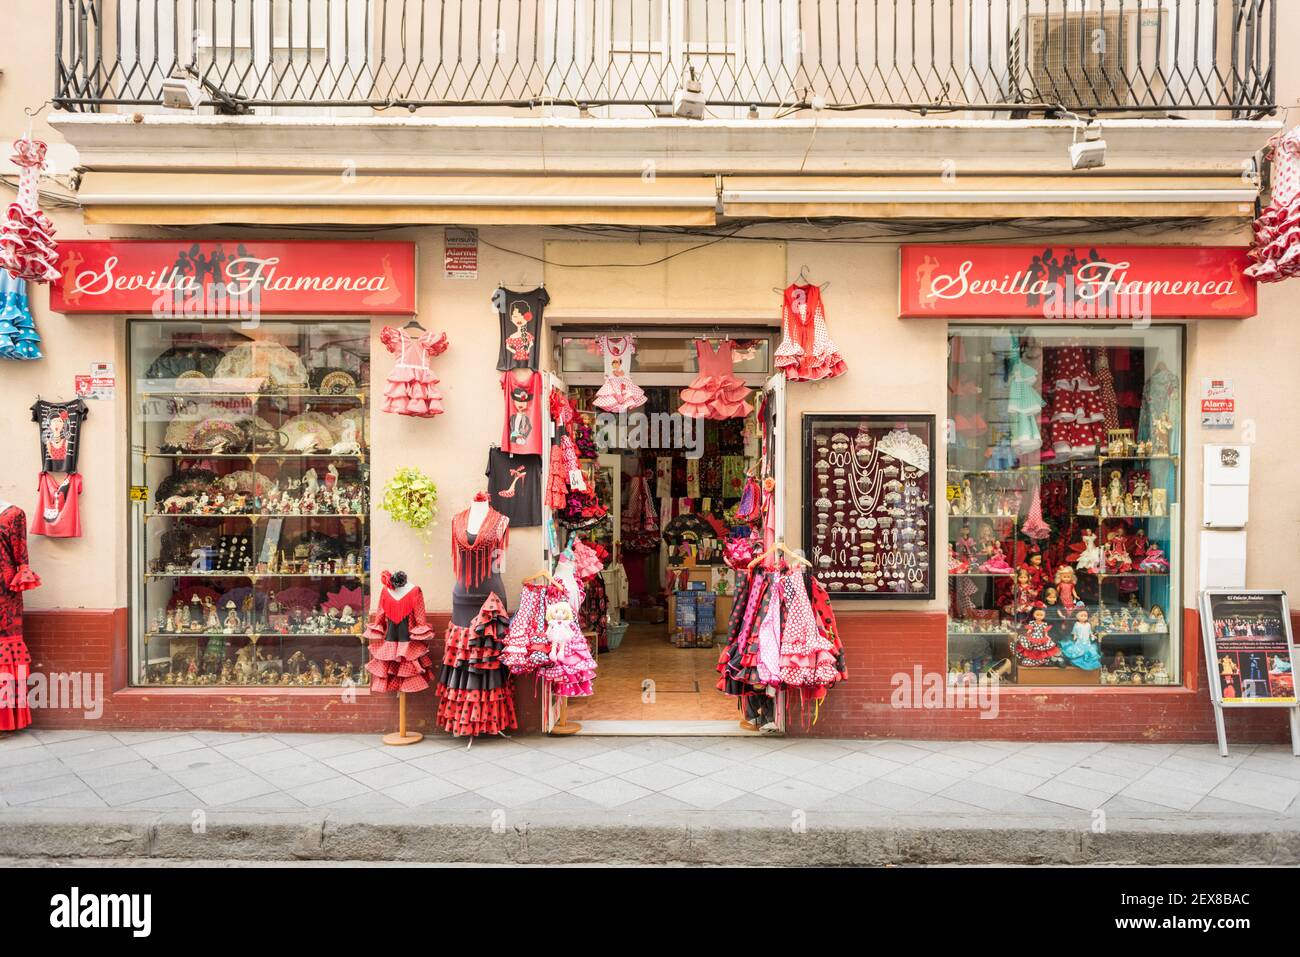 The Sevilla Flamenca Flamenco clothes equipment and gift shop in Seville Spain Stock Photo